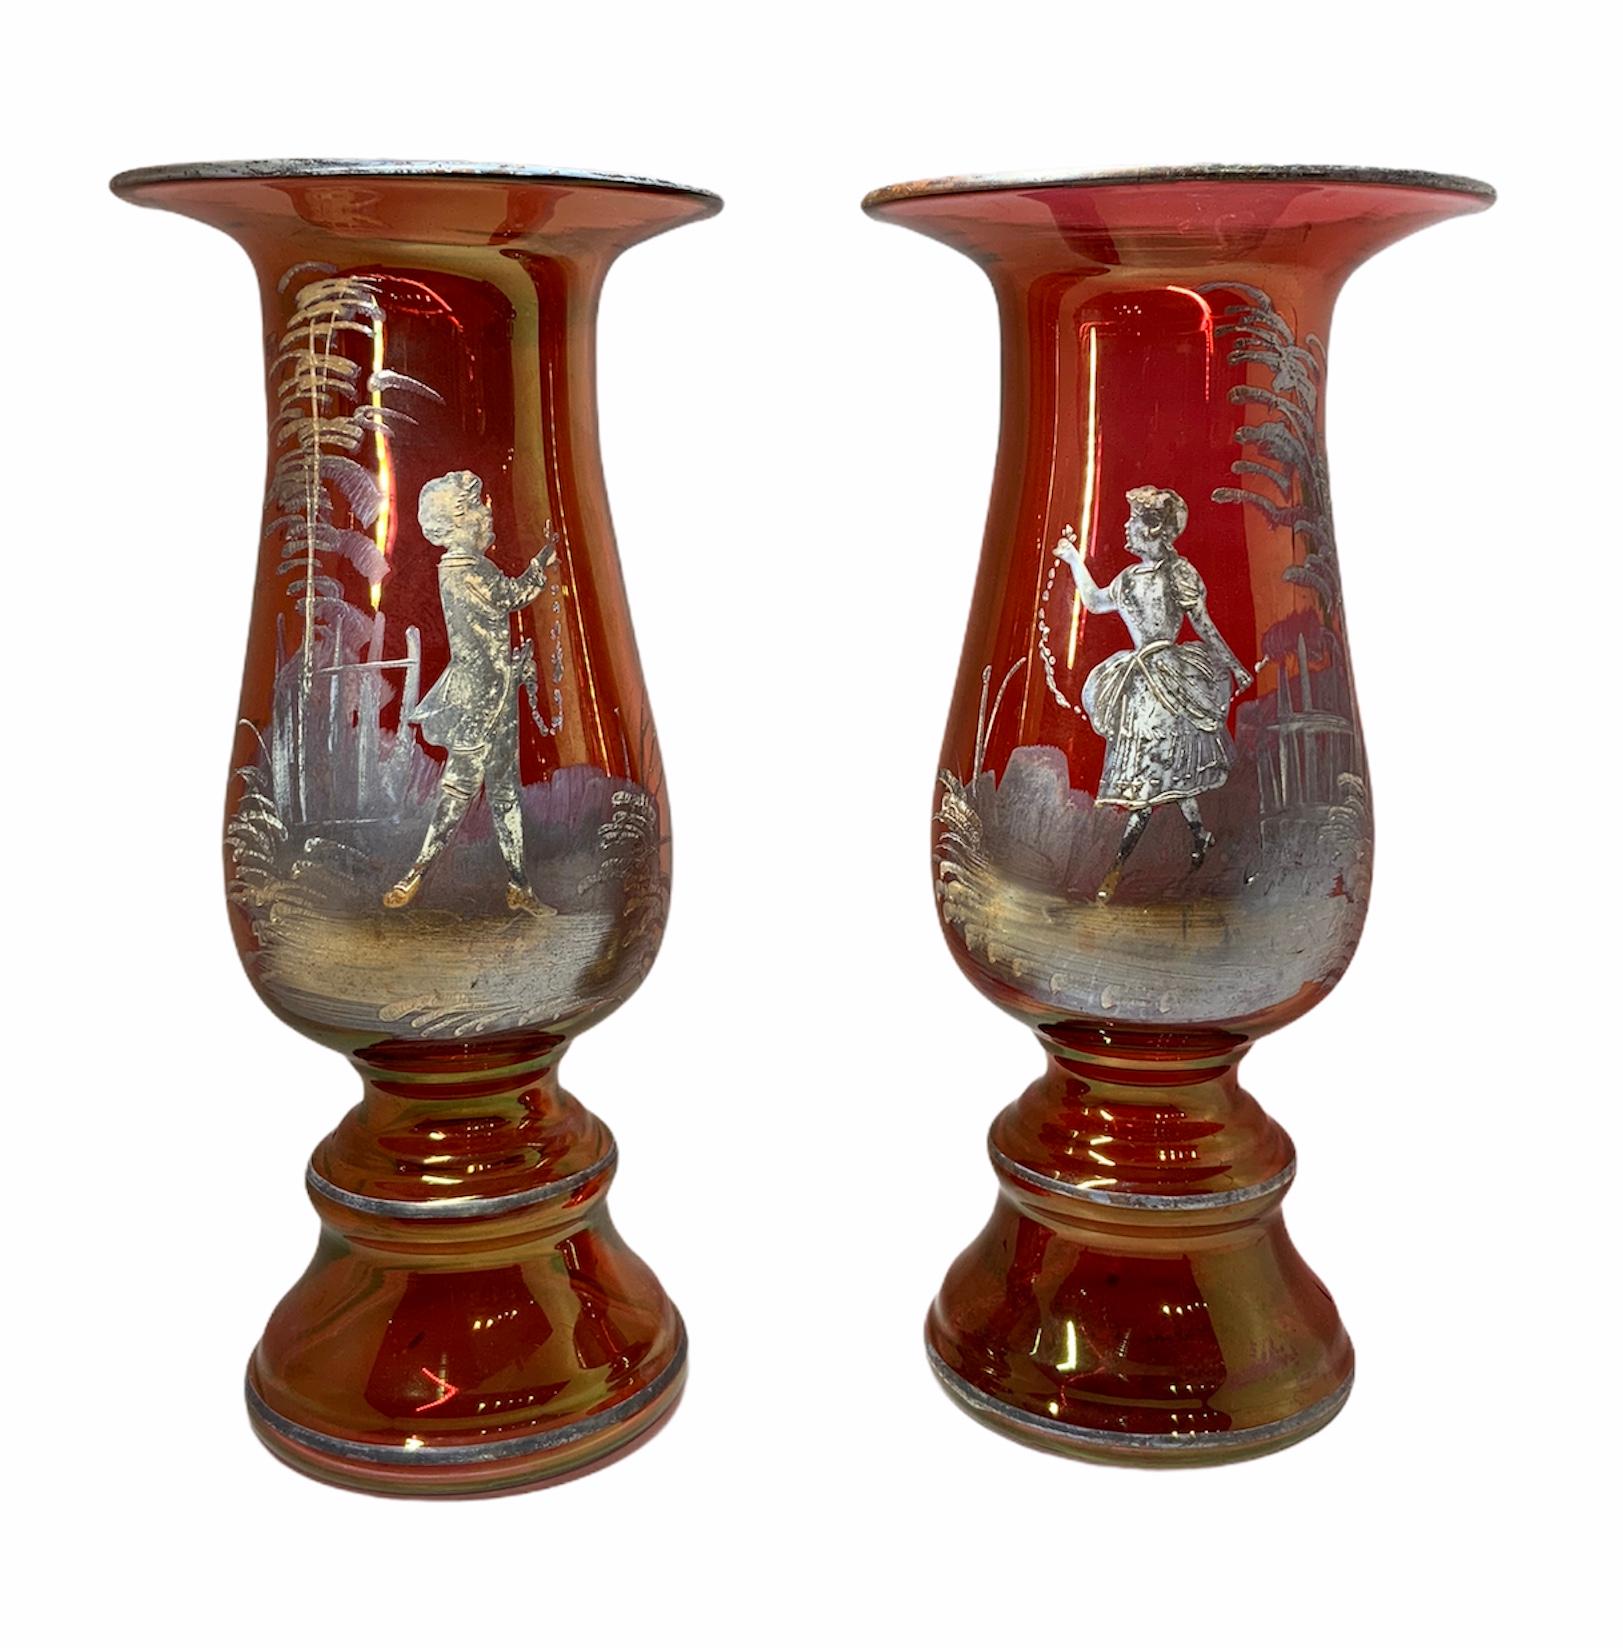 Pair of Mary Gregory Amber/Red Glass Hand Painted Enameled Vases